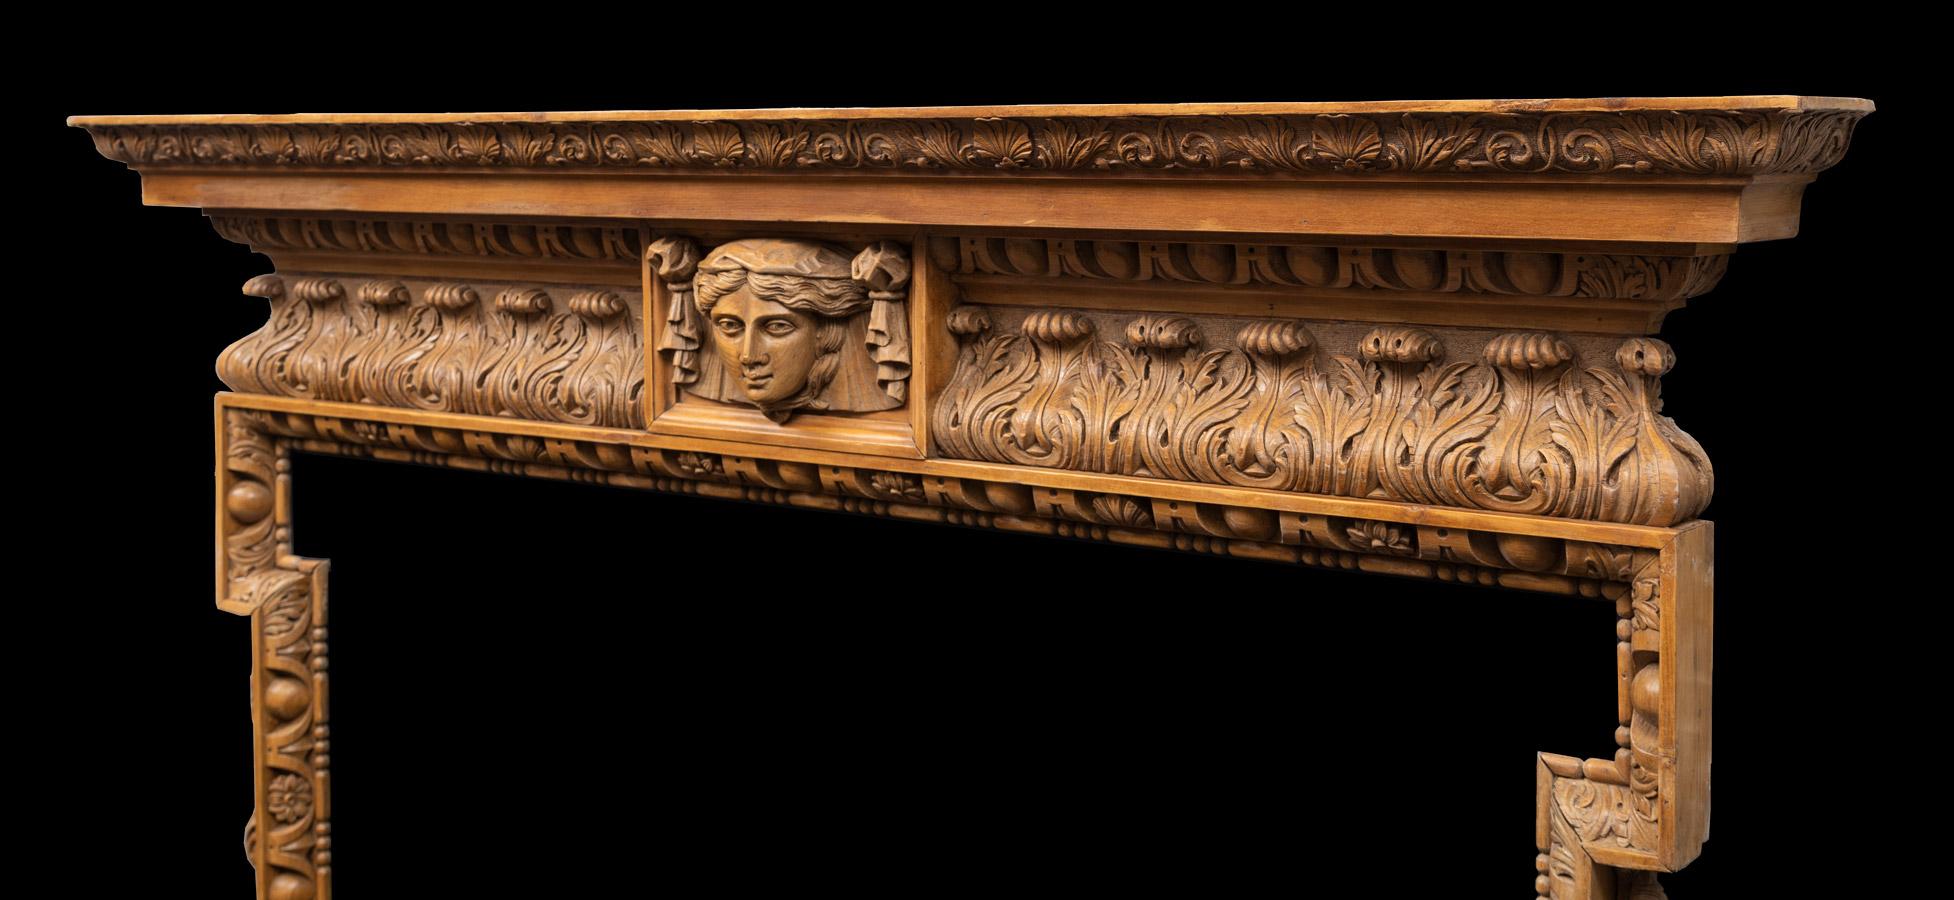 A tall and robustly carved George II style pine chimneypiece in the manner of William Kent. The acanthus decorated frieze with female mask at centre is under an egg and dart cornice shelf. The side scrolled consoles carved with acanthus, acorns and